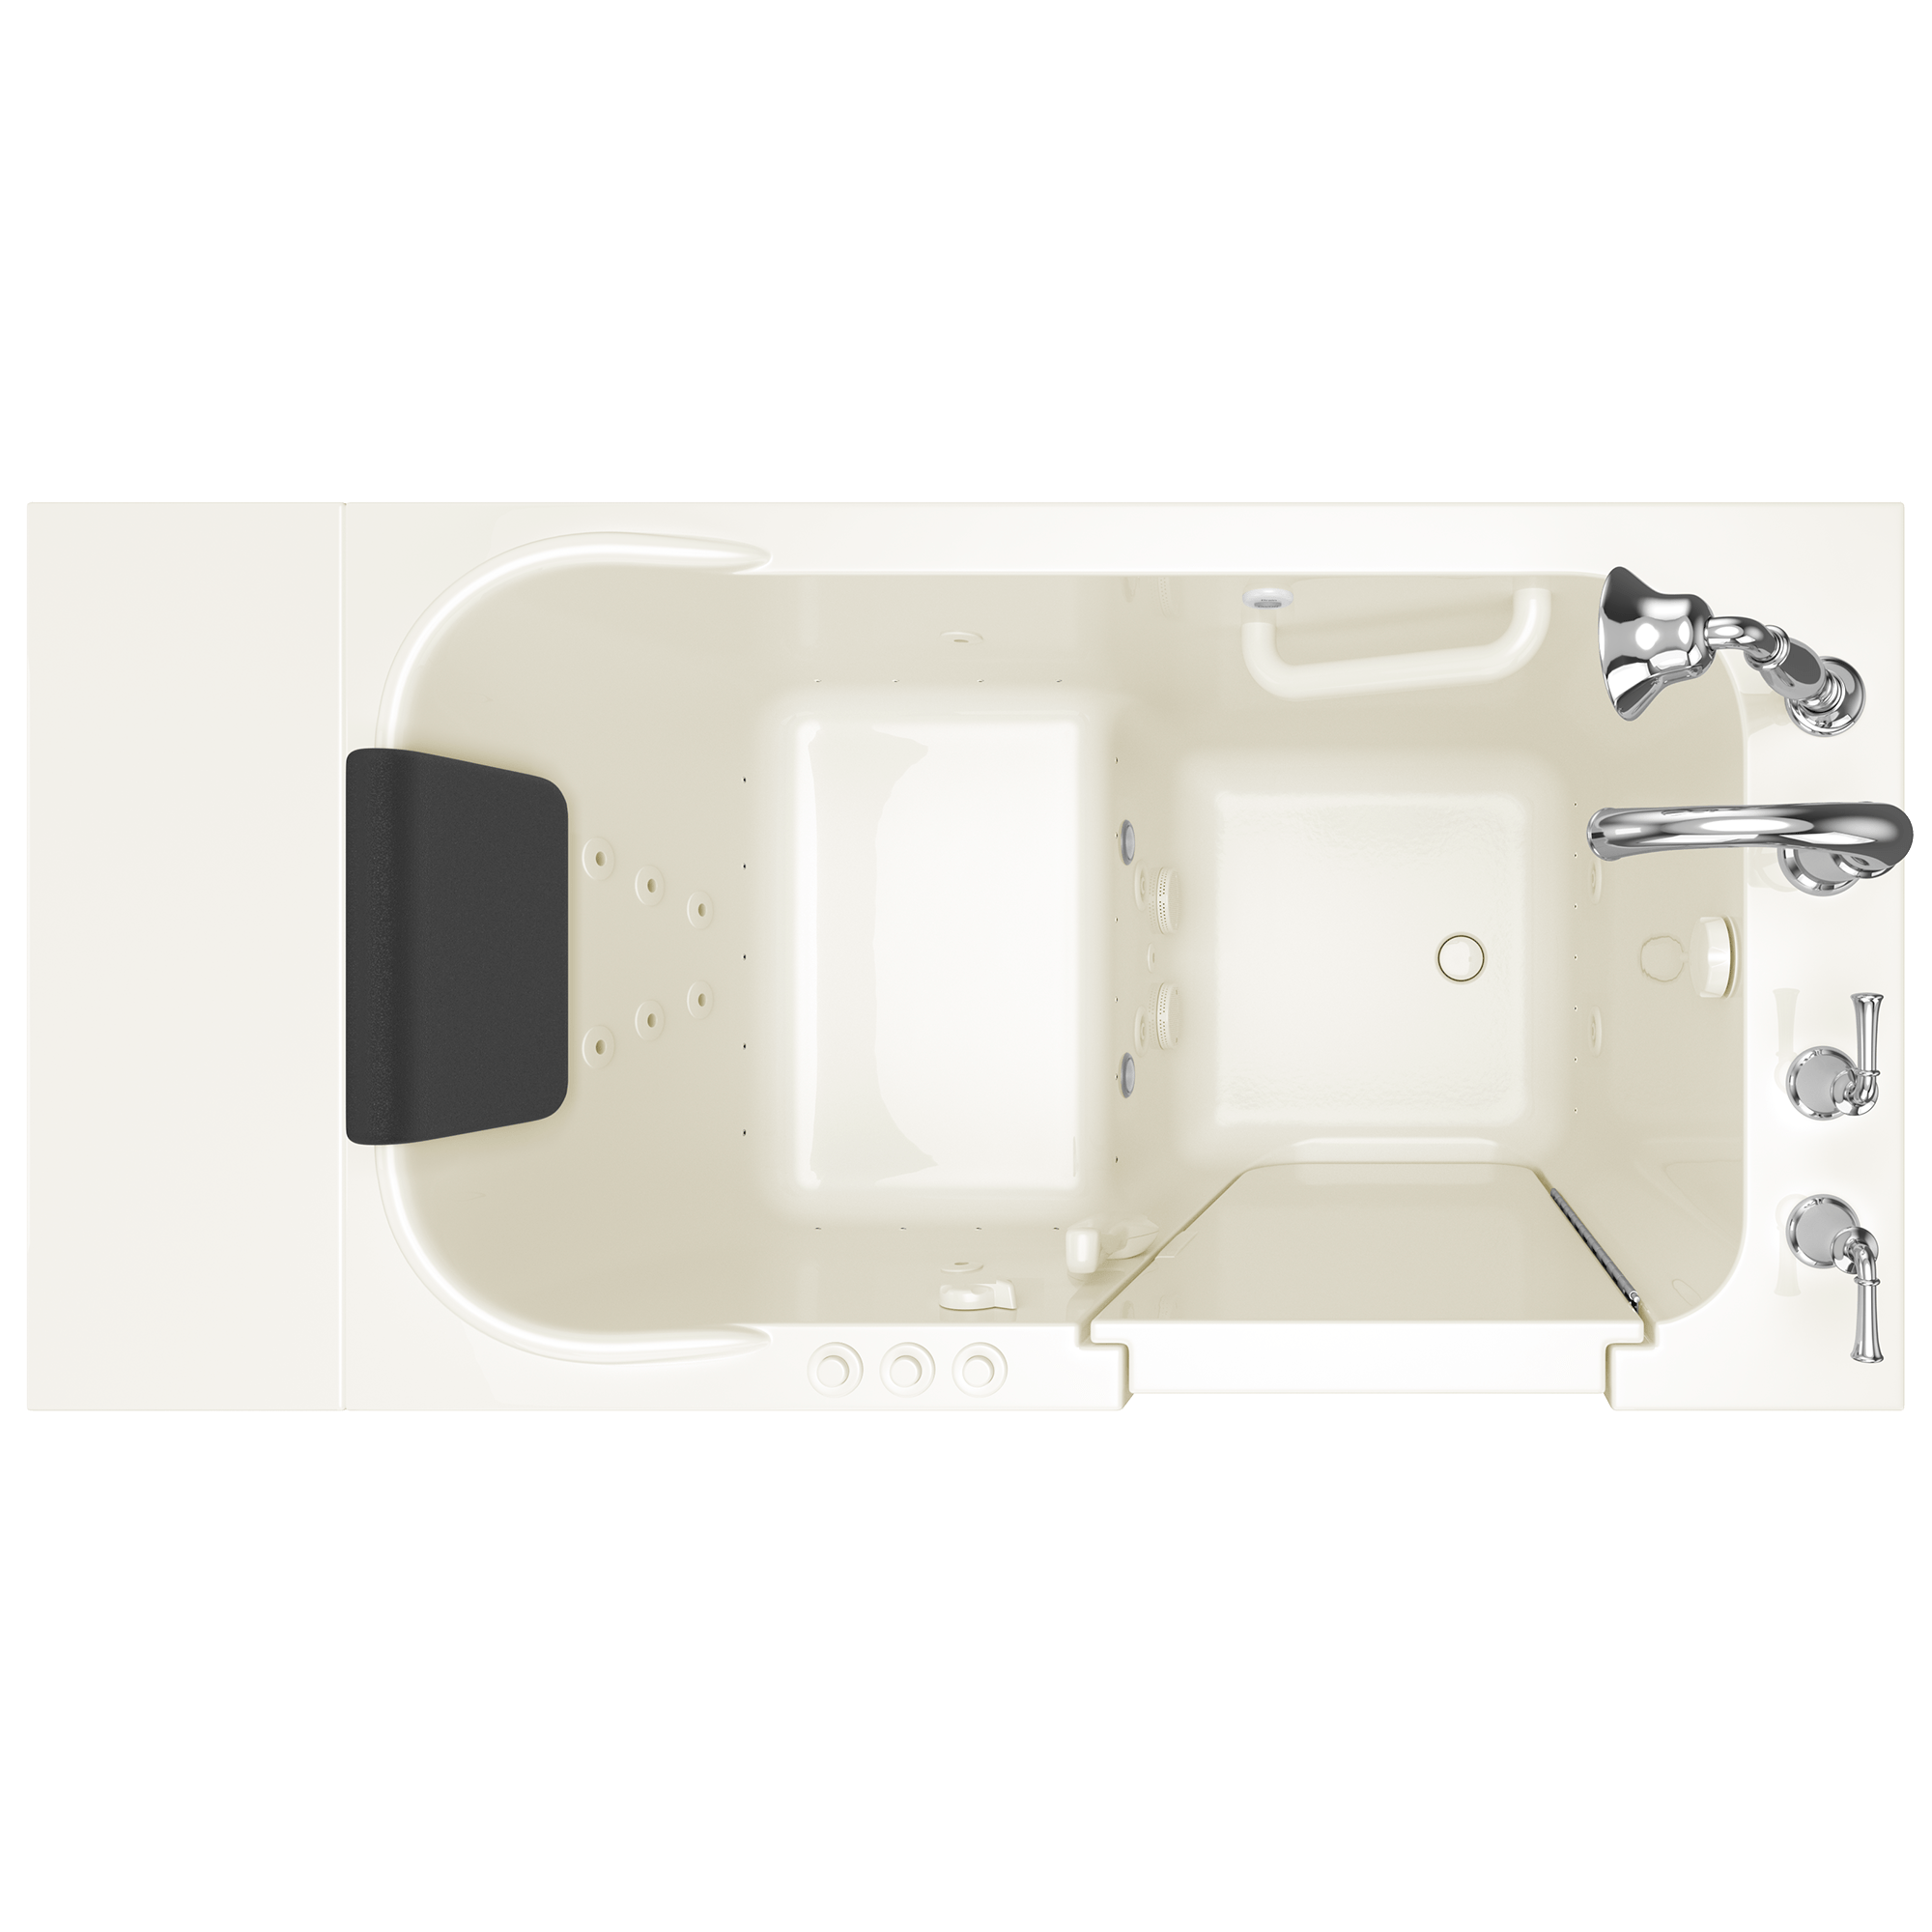 Gelcoat Premium Series 48x28 Inch Walk-In Bathtub with Dual Air Massage and Jet Massage System - Right Hand Door and Drain